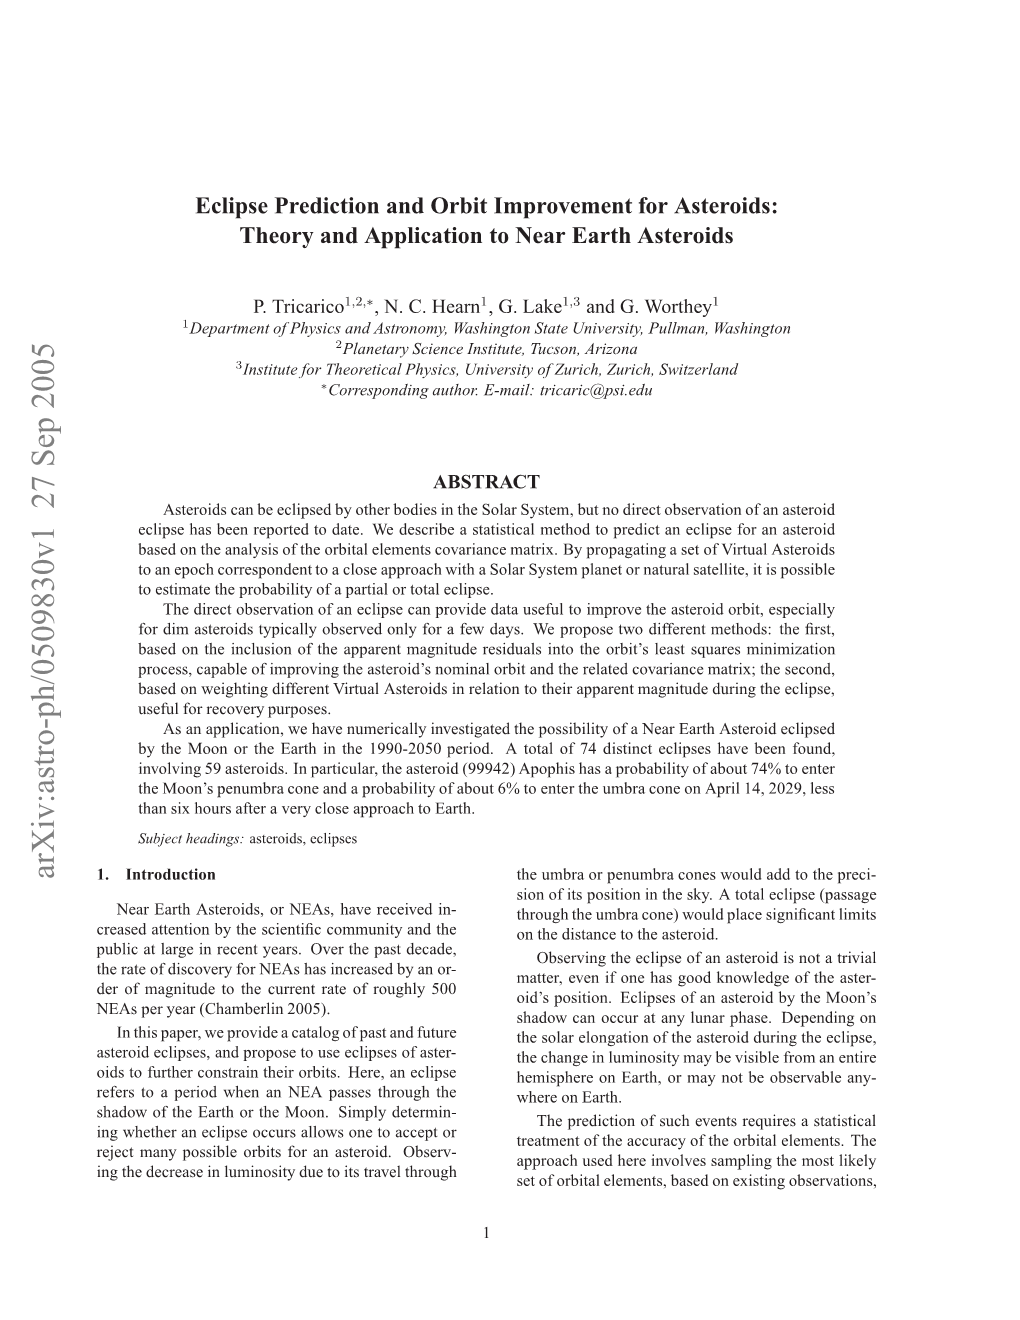 Eclipse Prediction and Orbit Improvement for Asteroids: Theory and Application to Near Earth Asteroids